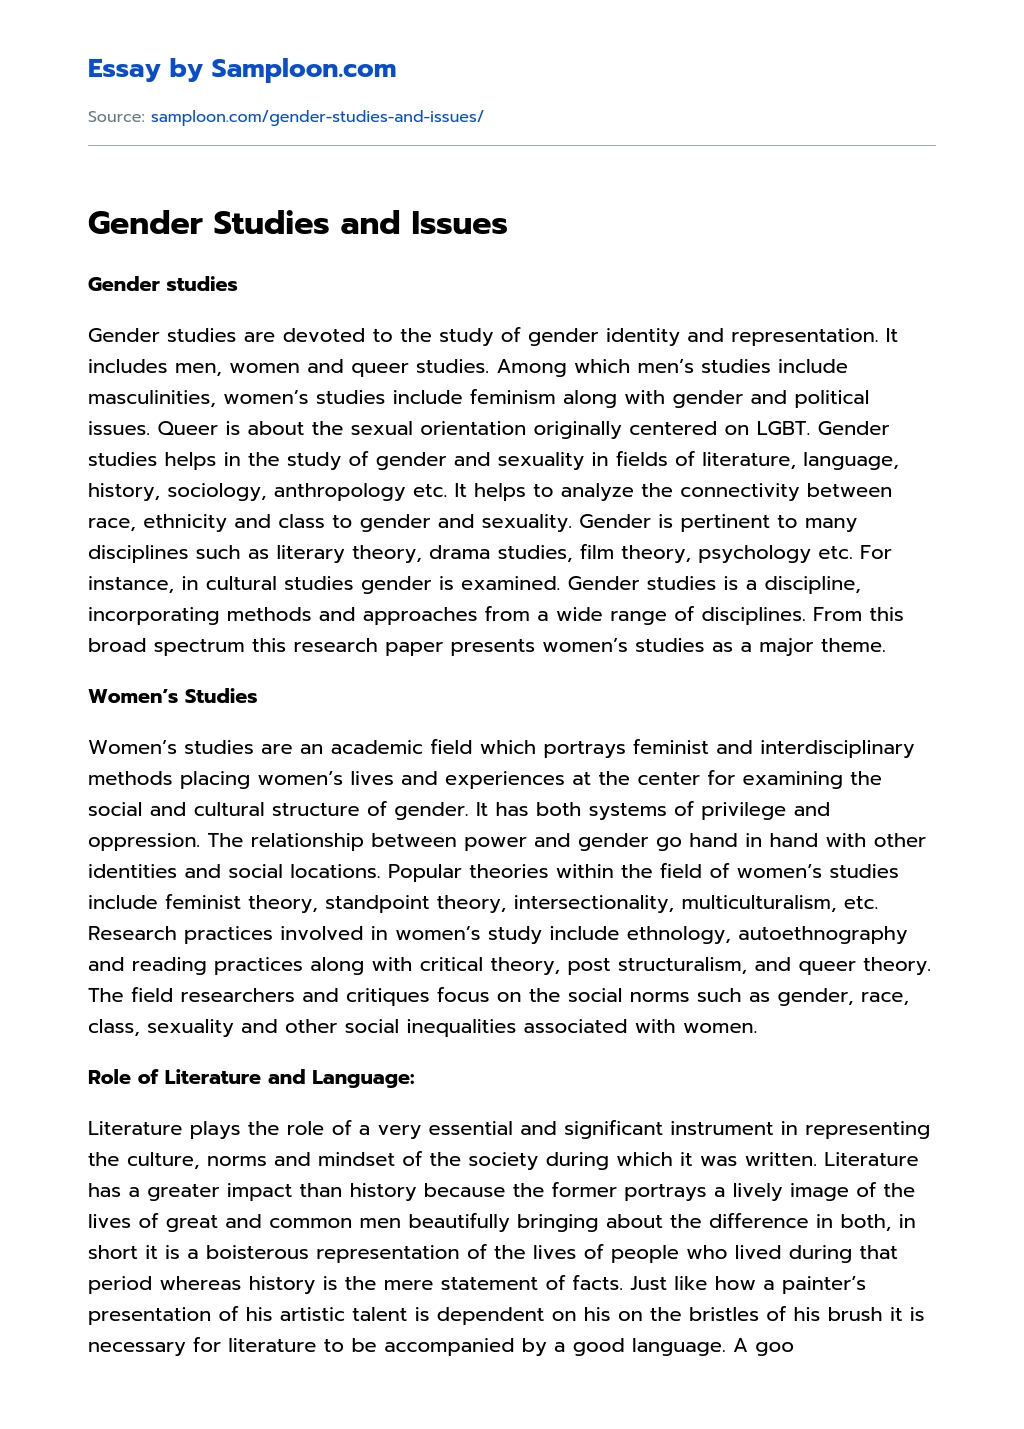 Gender Studies and Issues essay